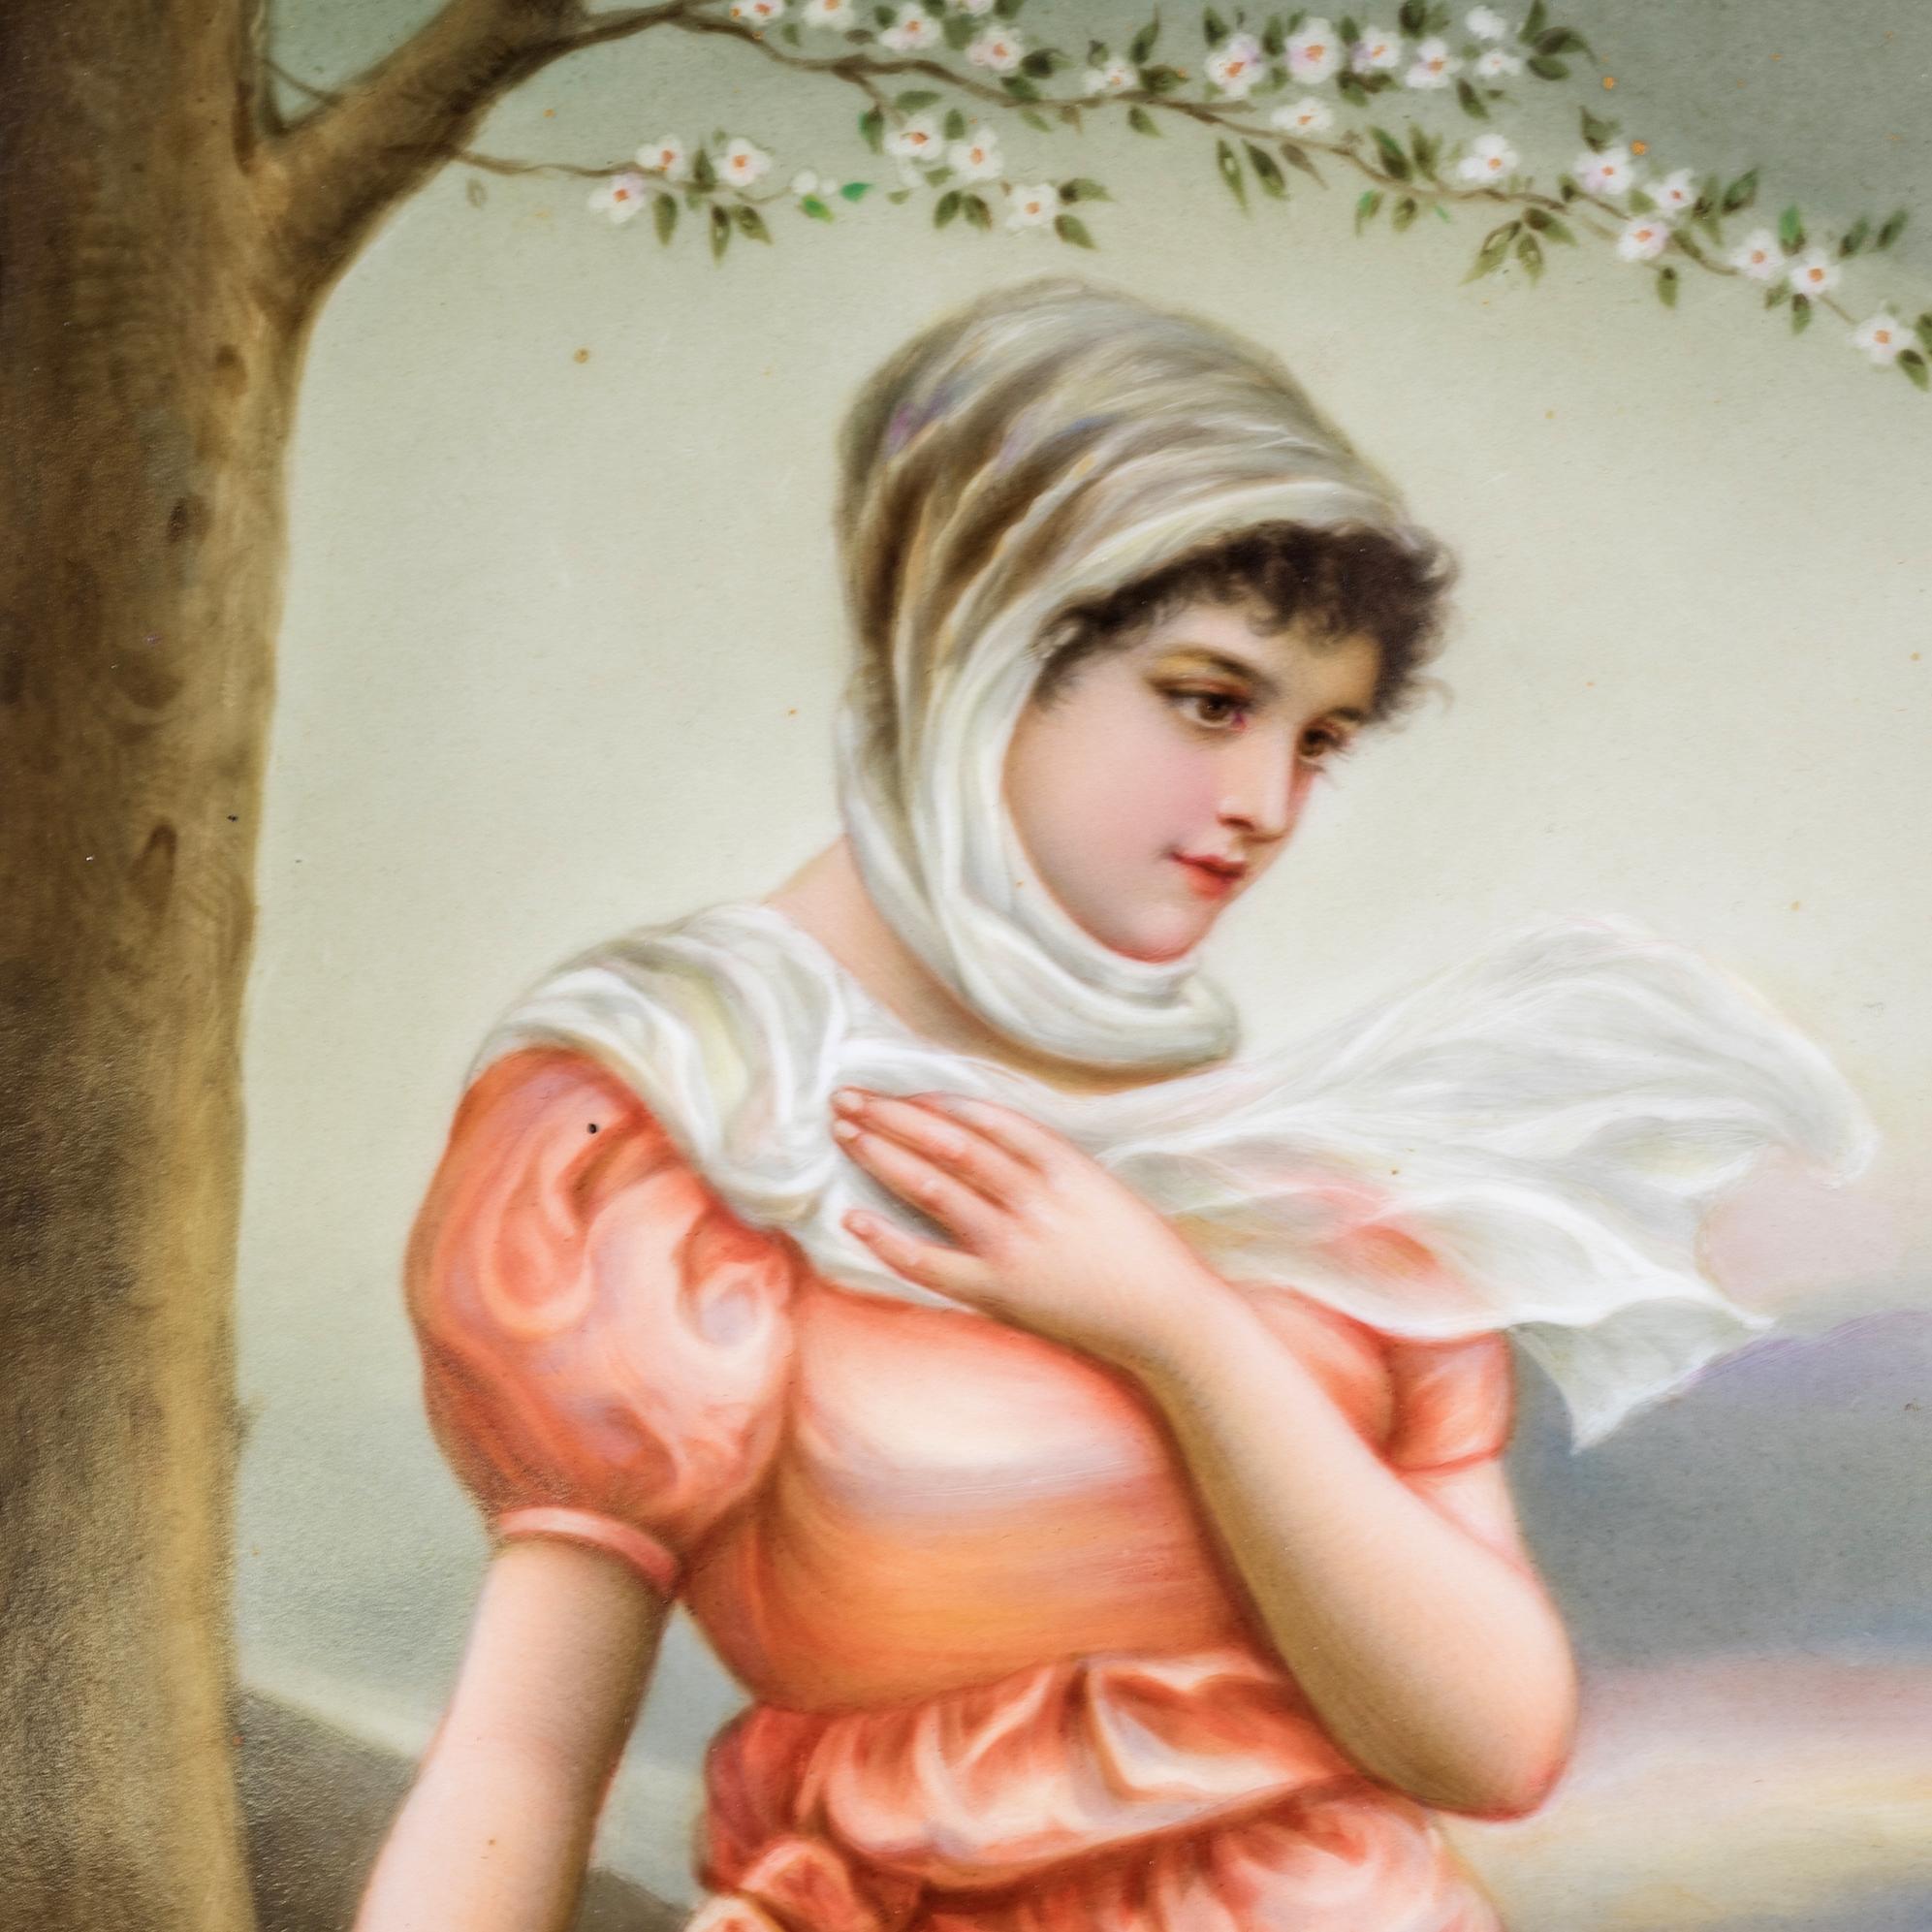 An exquisite Berlin painted rectangular porcelain plaque of a wistful young beauty, standing beside a fence in a landscape, in the manner of Baron Bodenhausen.

Maker: K.P.M.
Origin: German
Date: Late 19th century
Dimension: 16 in x 10 3/8 in